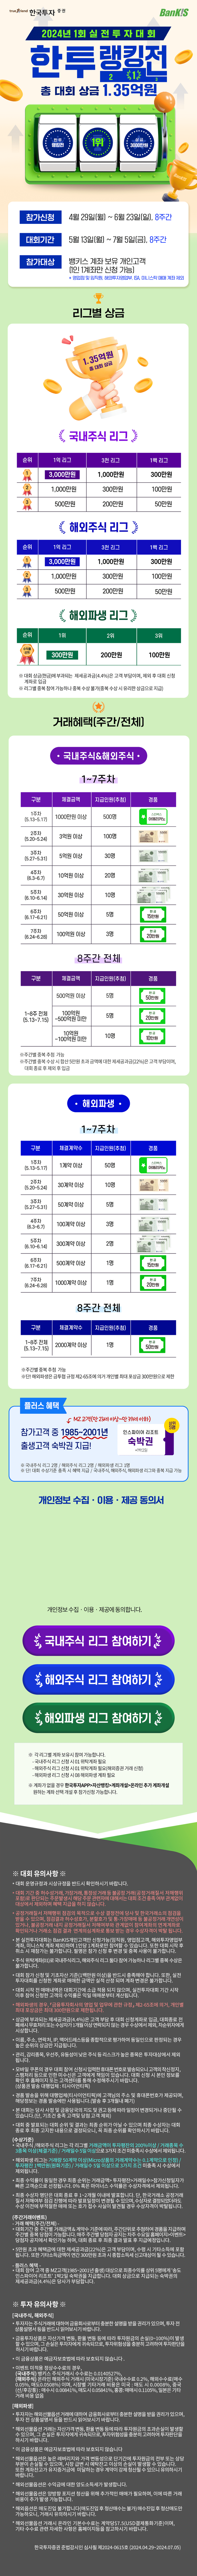 FY24 제1회 실전투자대회